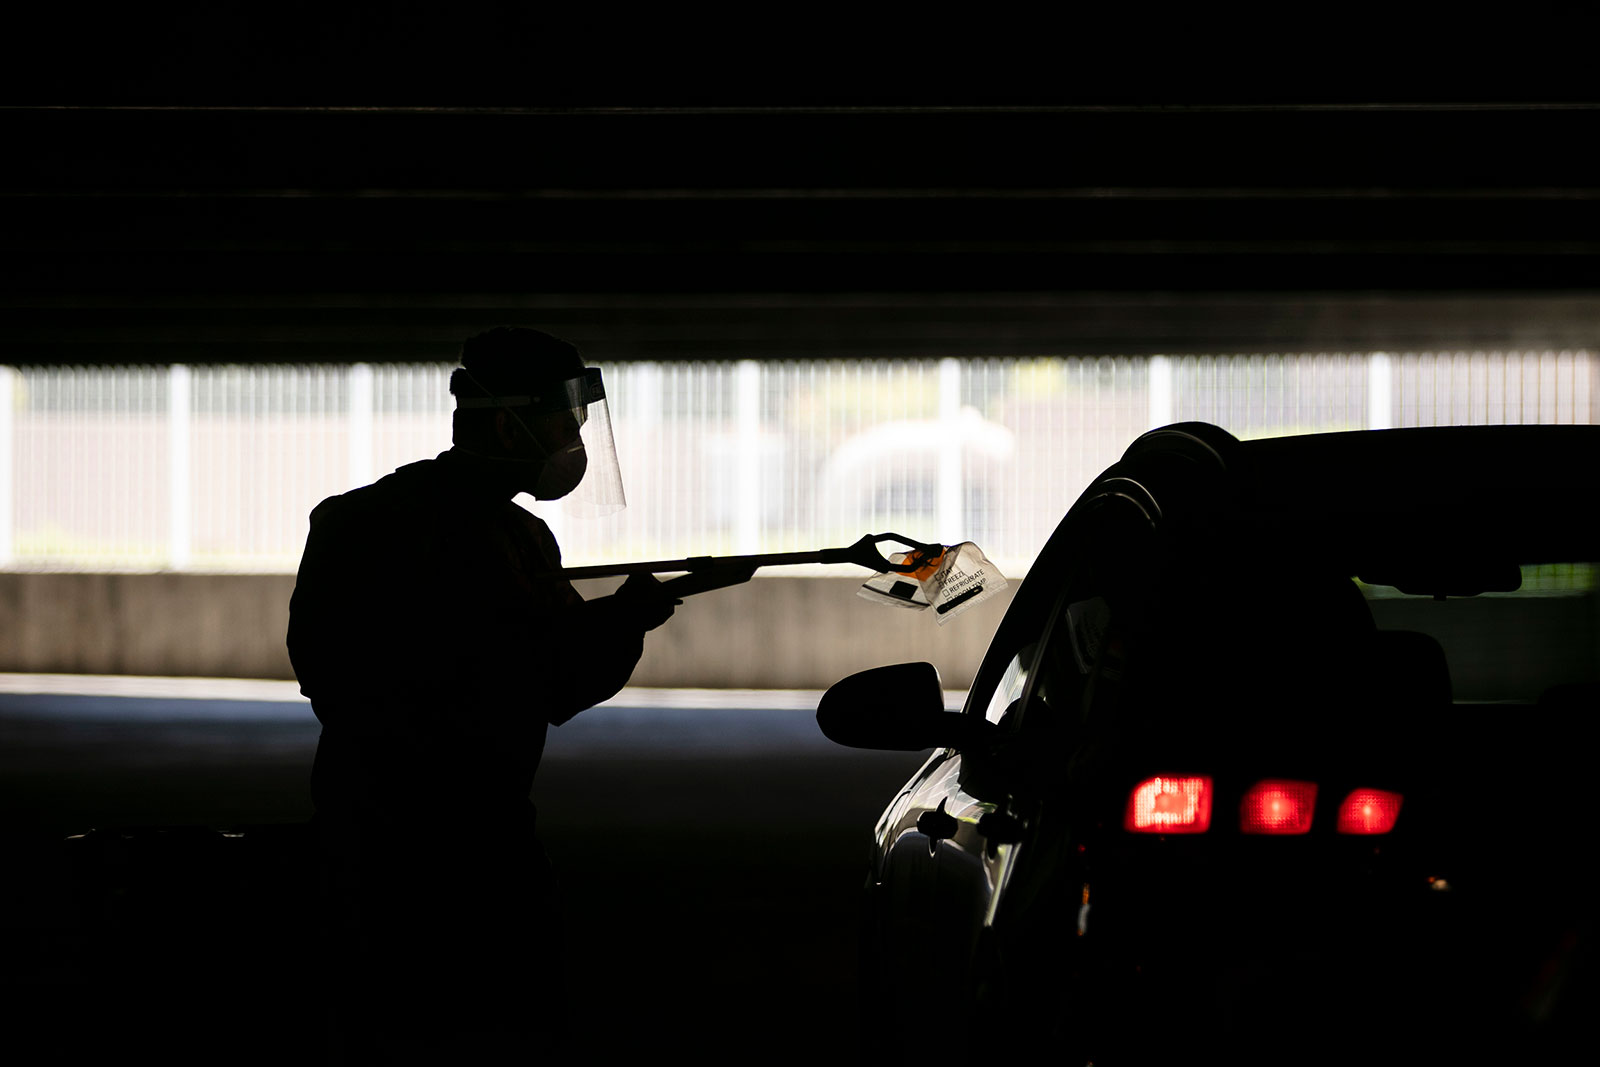 Physician assistant Calvin Tran collects a nasal swab sample at a coronavirus drive-thru testing site in Anaheim, California, on Thursday, July 16.